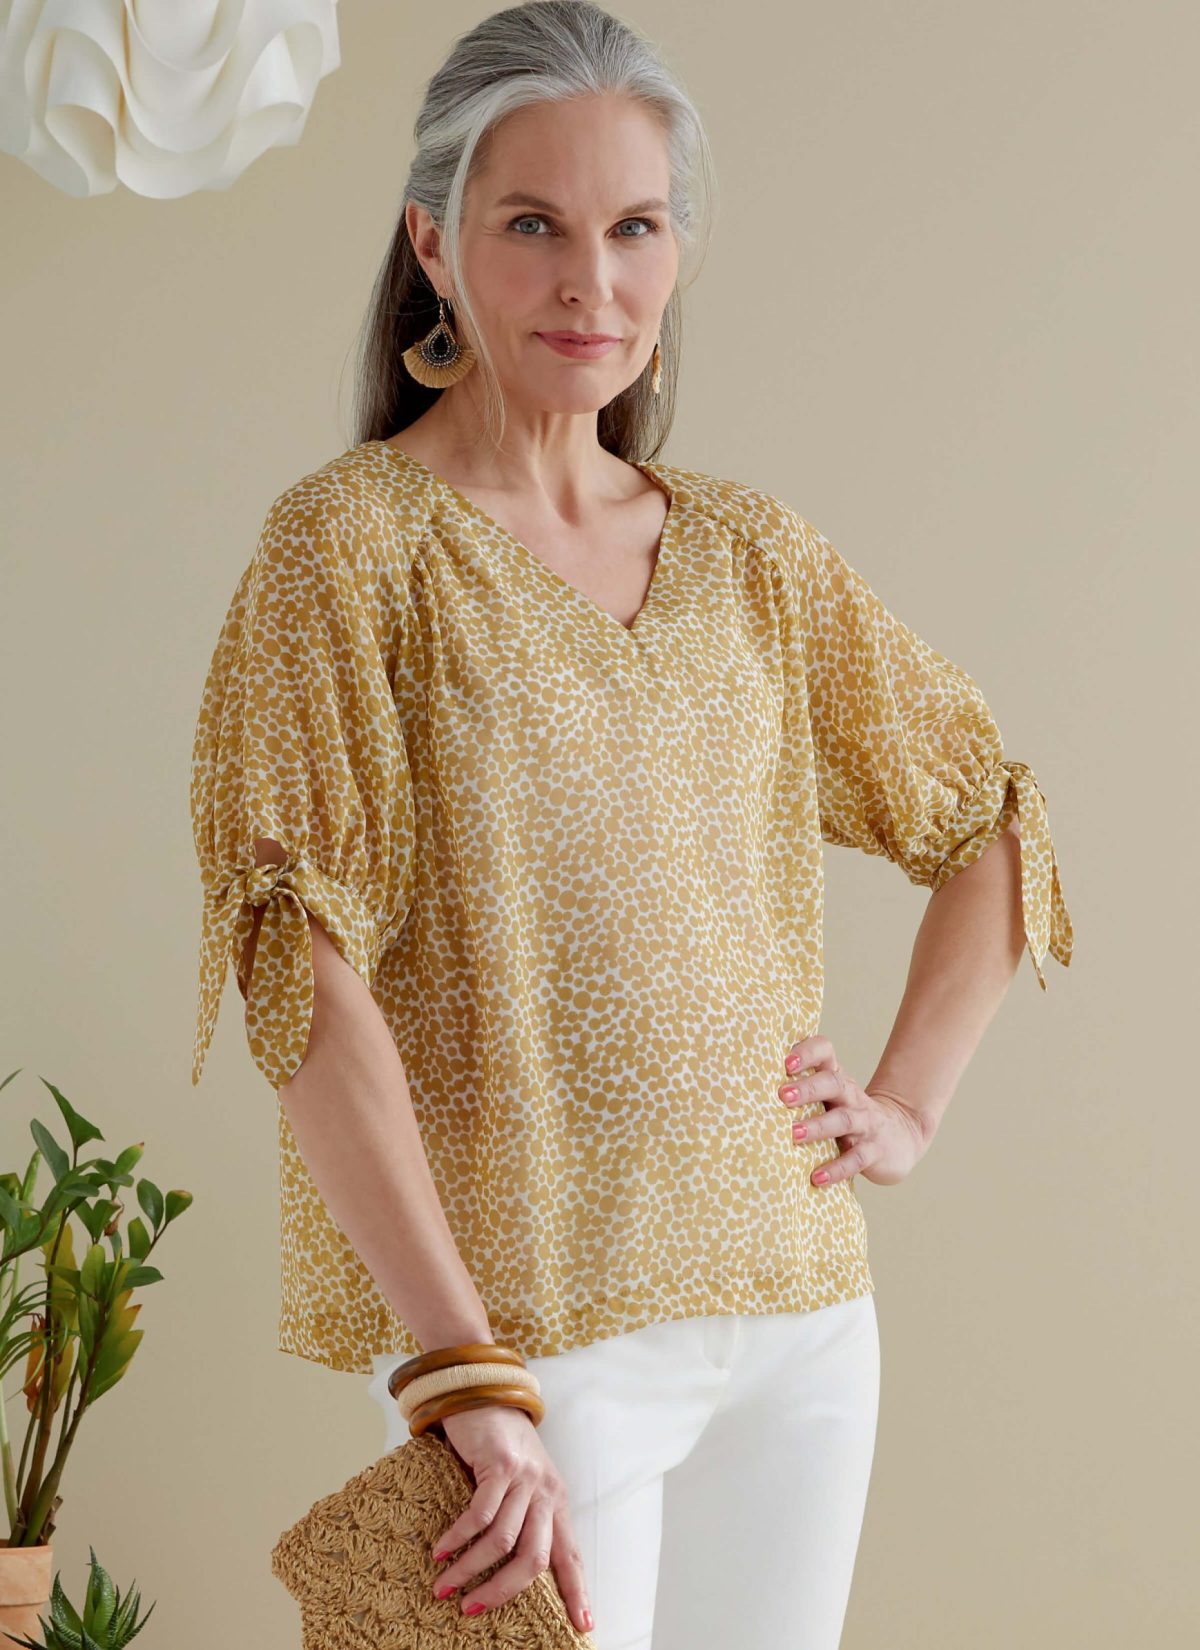 Butterick Sewing Pattern B6770 Misses' Tops and Sash